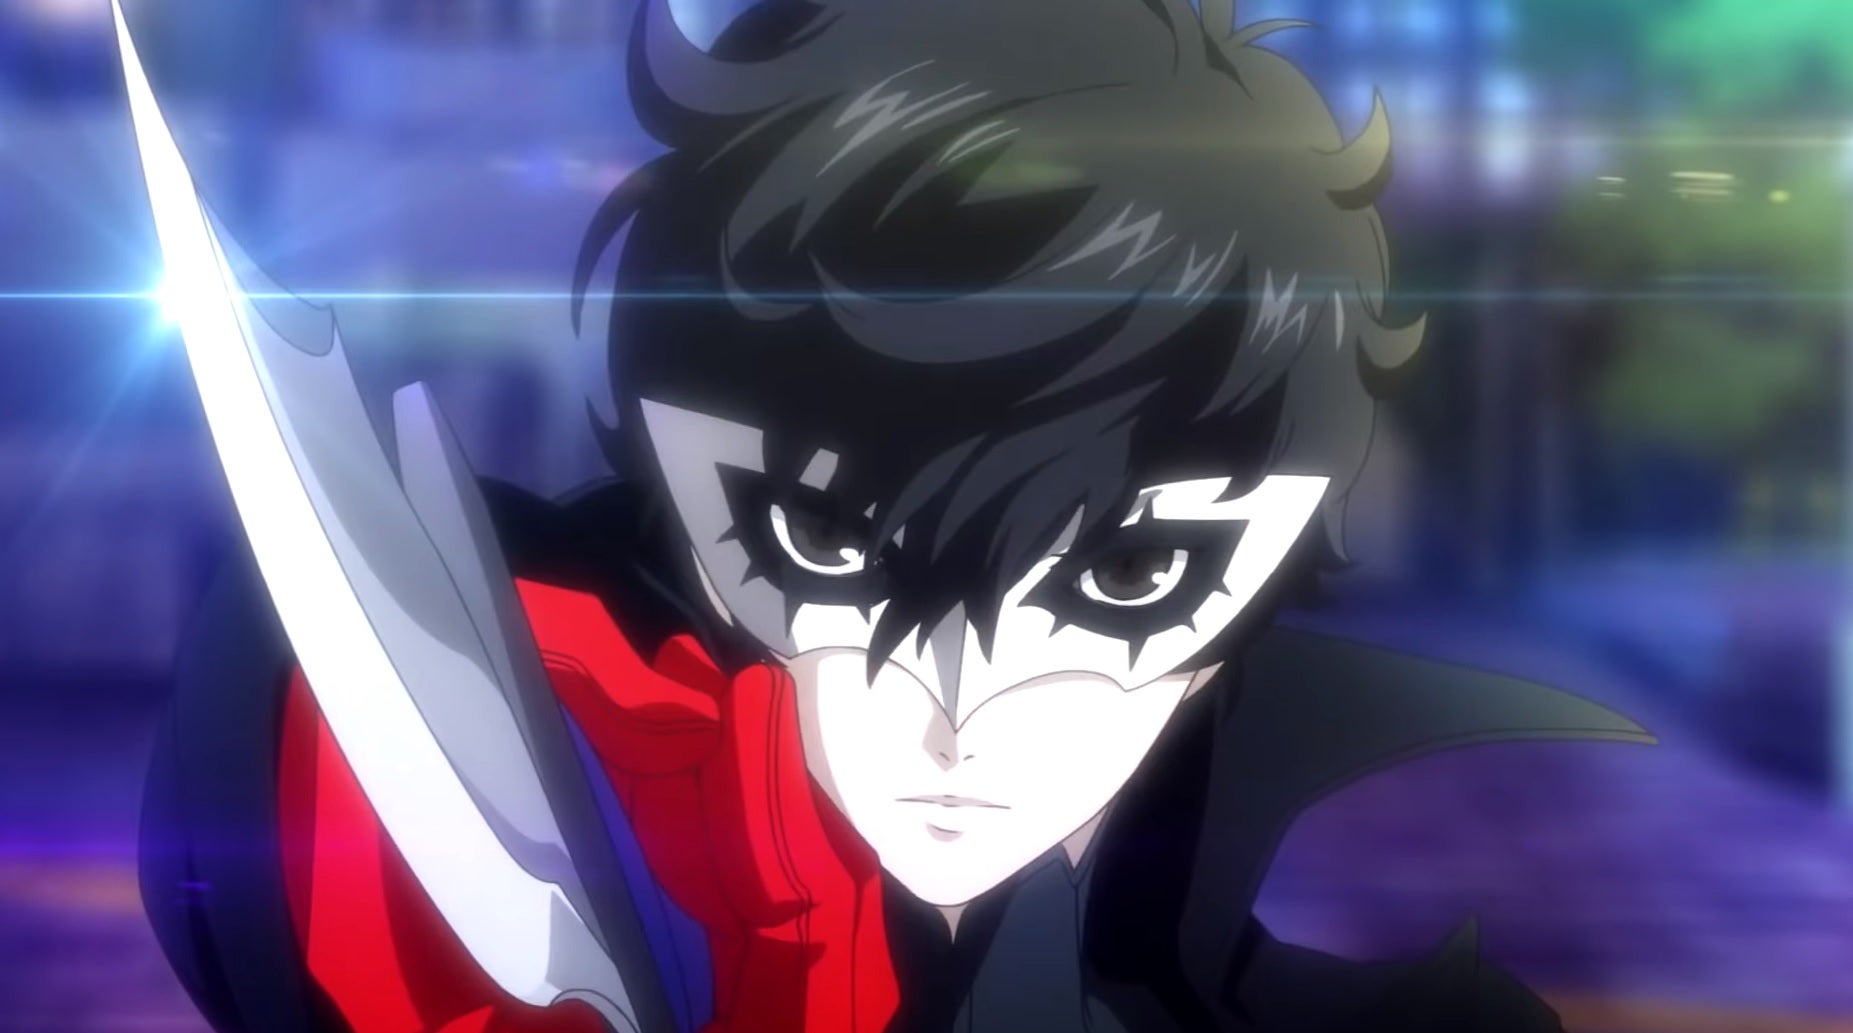 Image for Persona 5 Strikers will launch on PC in February according to leaked trailer